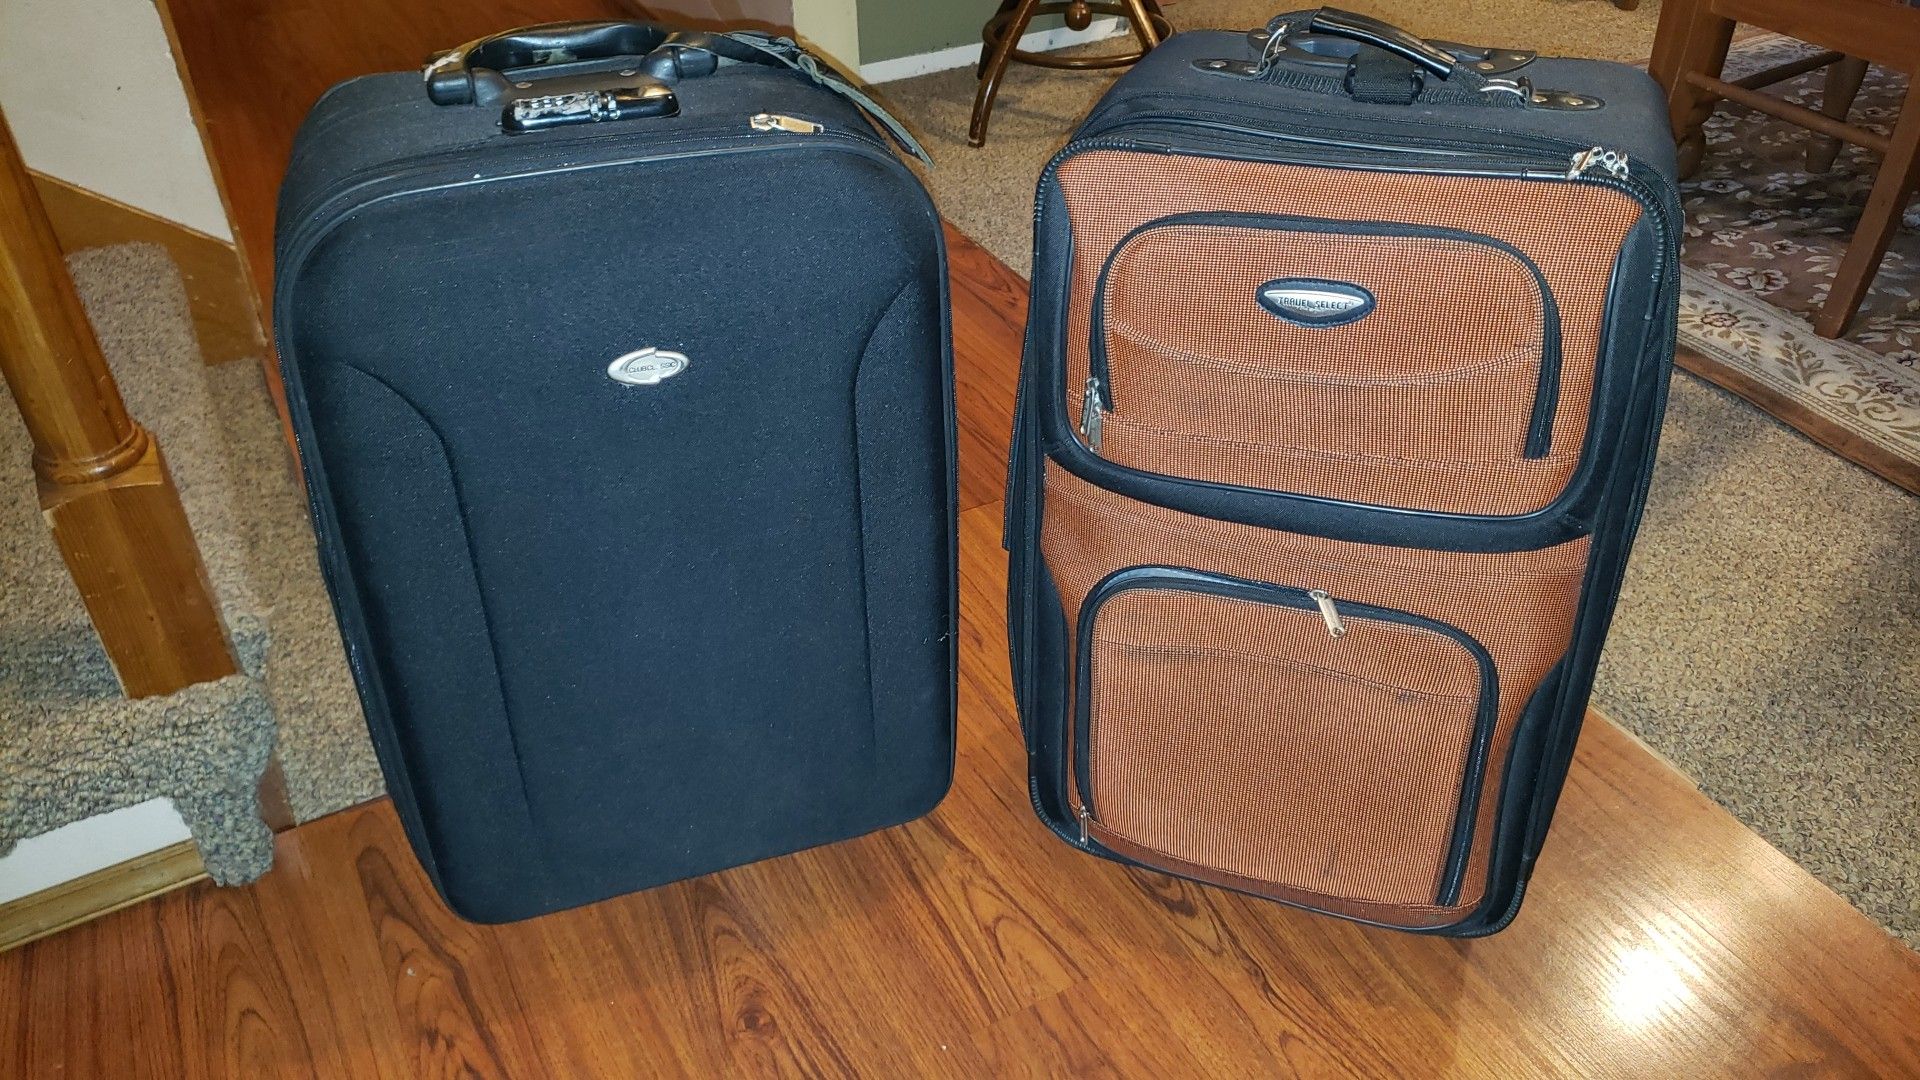 2 suitcases both for $10